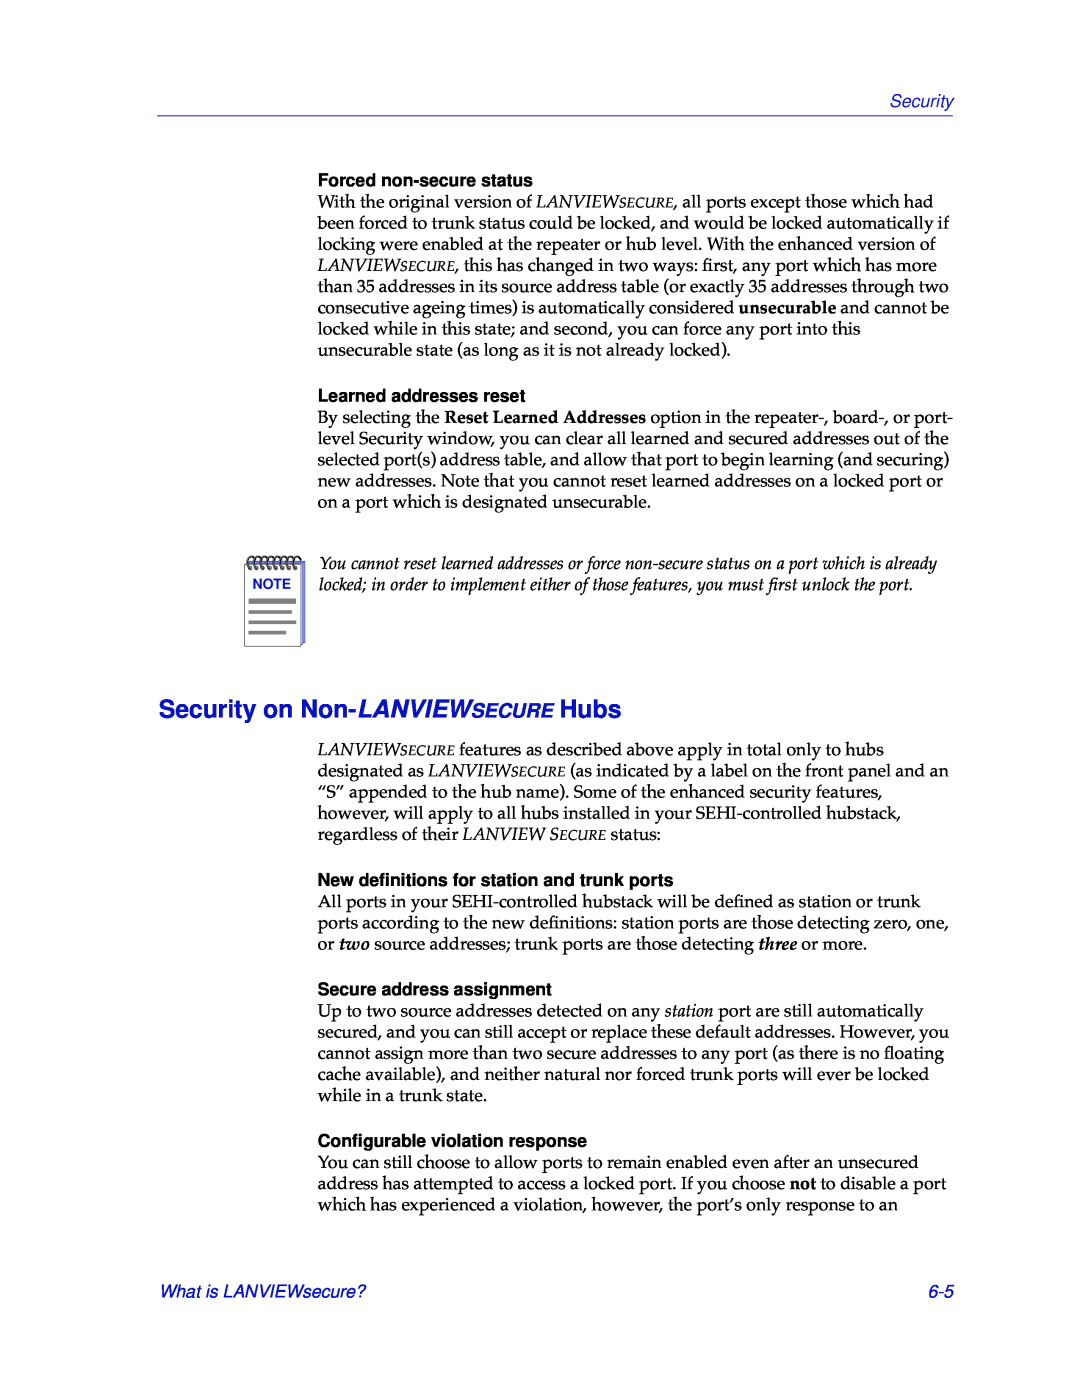 Cabletron Systems SEHI-22/24 manual Security on Non-LANVIEWSECURE Hubs, Forced non-secure status, Learned addresses reset 